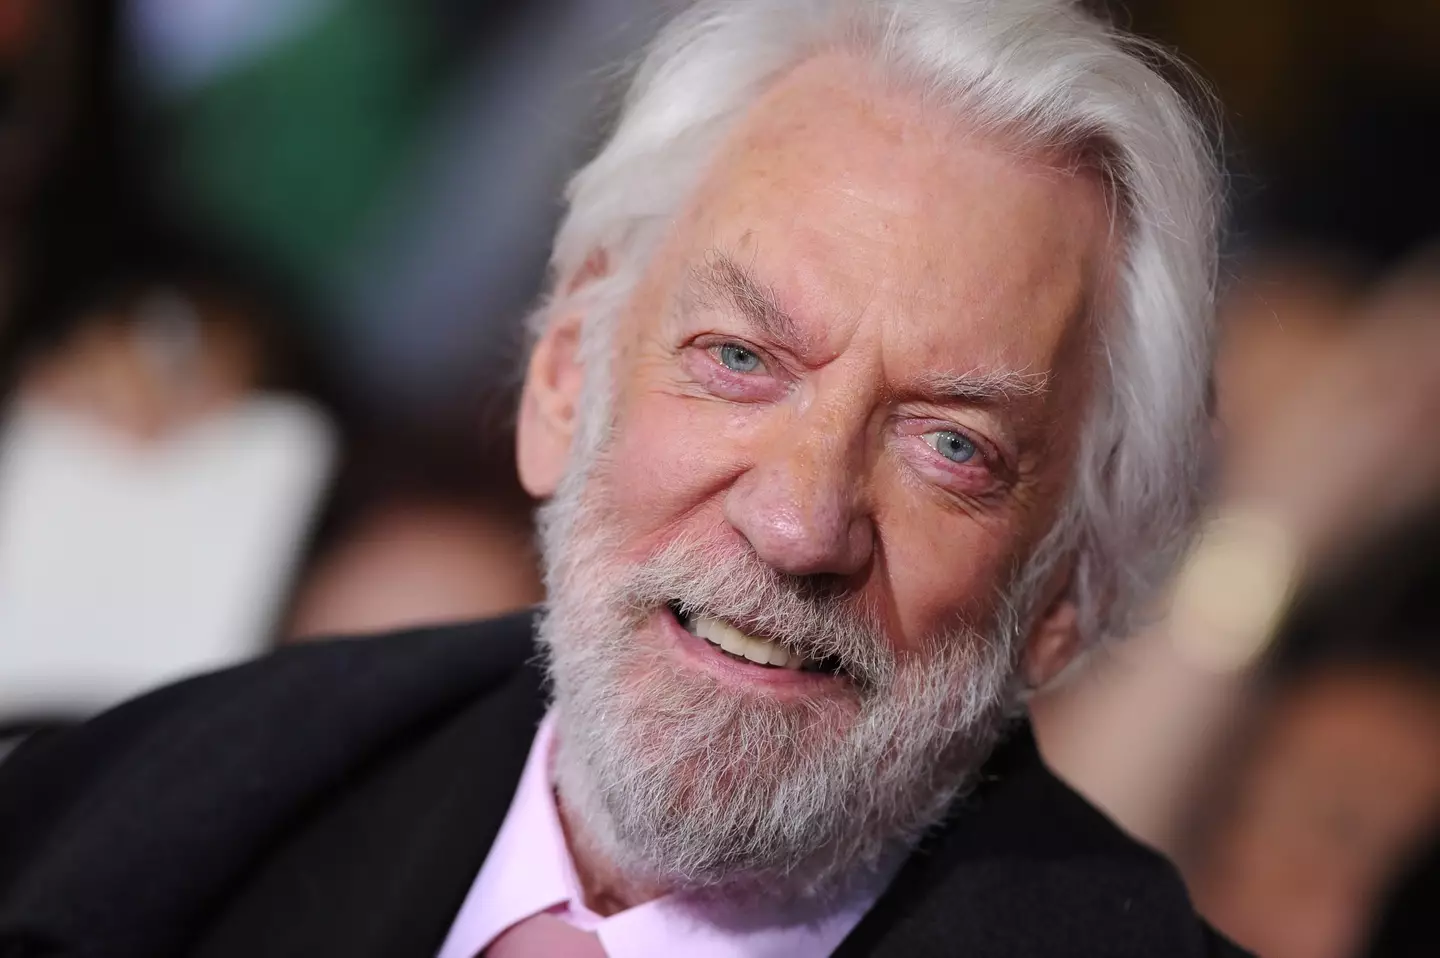 Donald Sutherland at the Los Angeles premiere of Hunger Games: Catching Fire in 2013. (Axelle/Bauer-Griffin/FilmMagic)